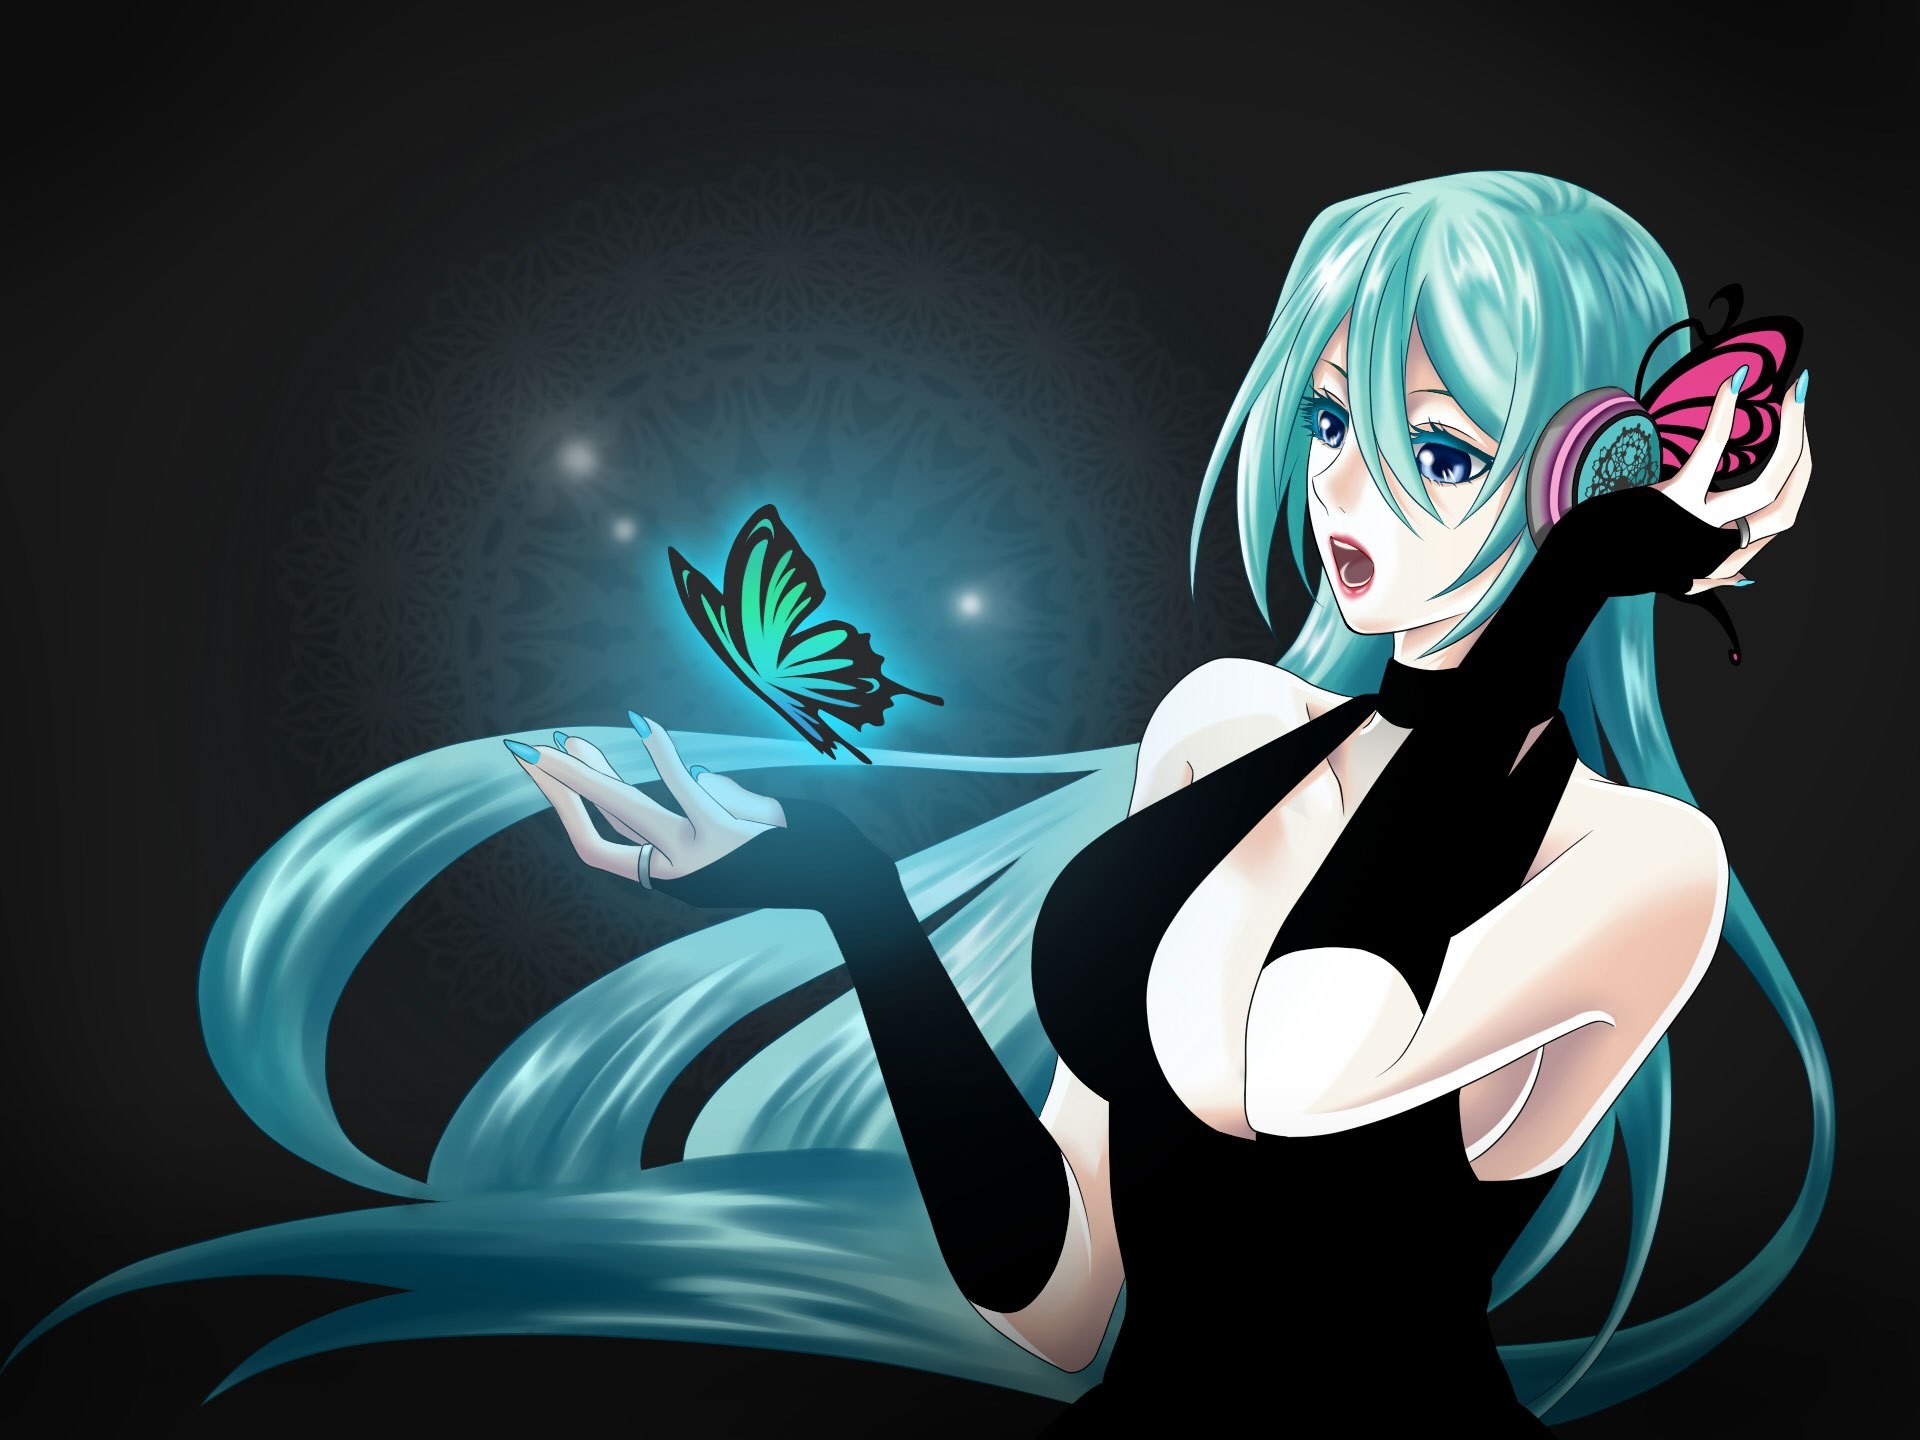 Nice Anime Wallpapers Hd Free Wallpaper For Desktop and Mobile in All Resolutions Free Download nature Best